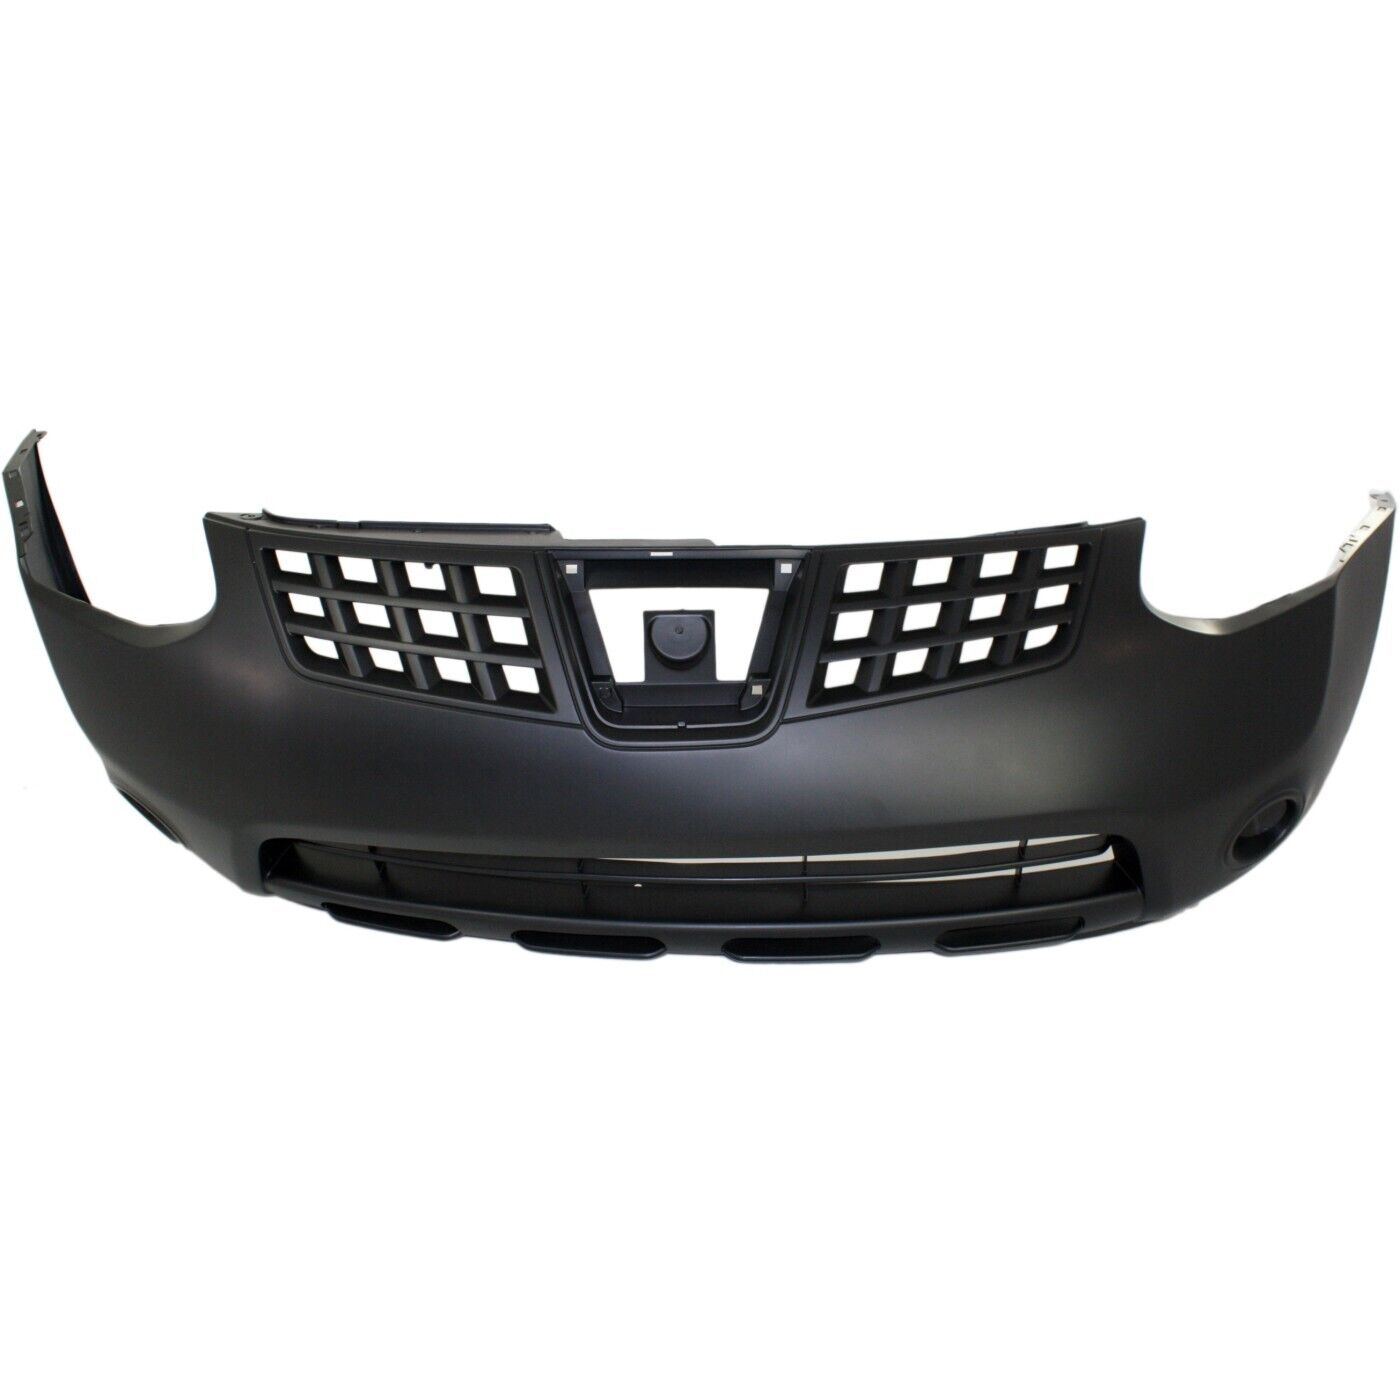 Front Bumper Cover For 2008-2010 Nissan Rogue w/ fog lamp holes Primed